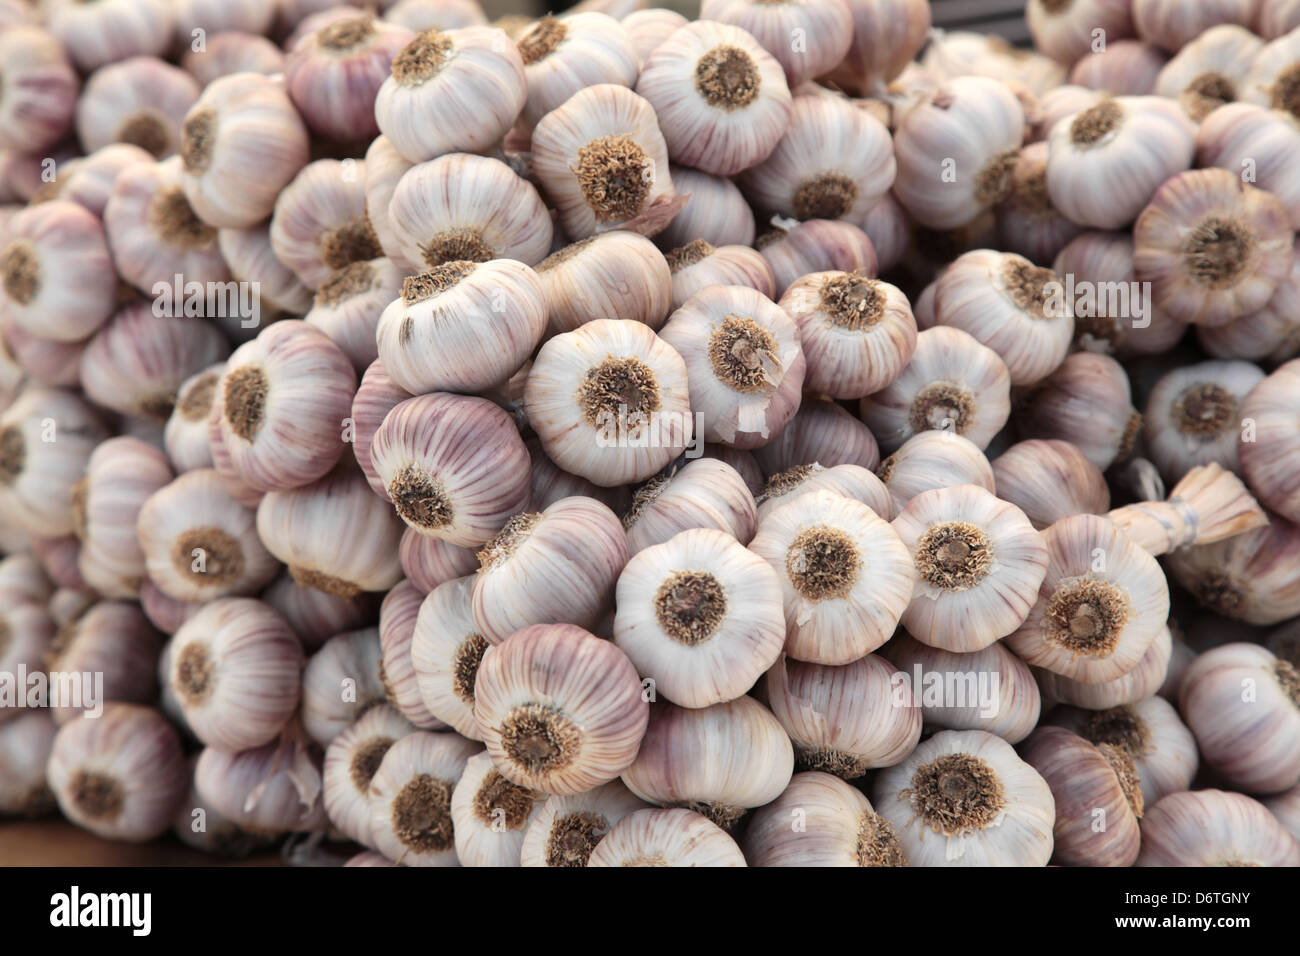 Plenty of garlics for sale at a street fruit and vegetable market. Stock Photo